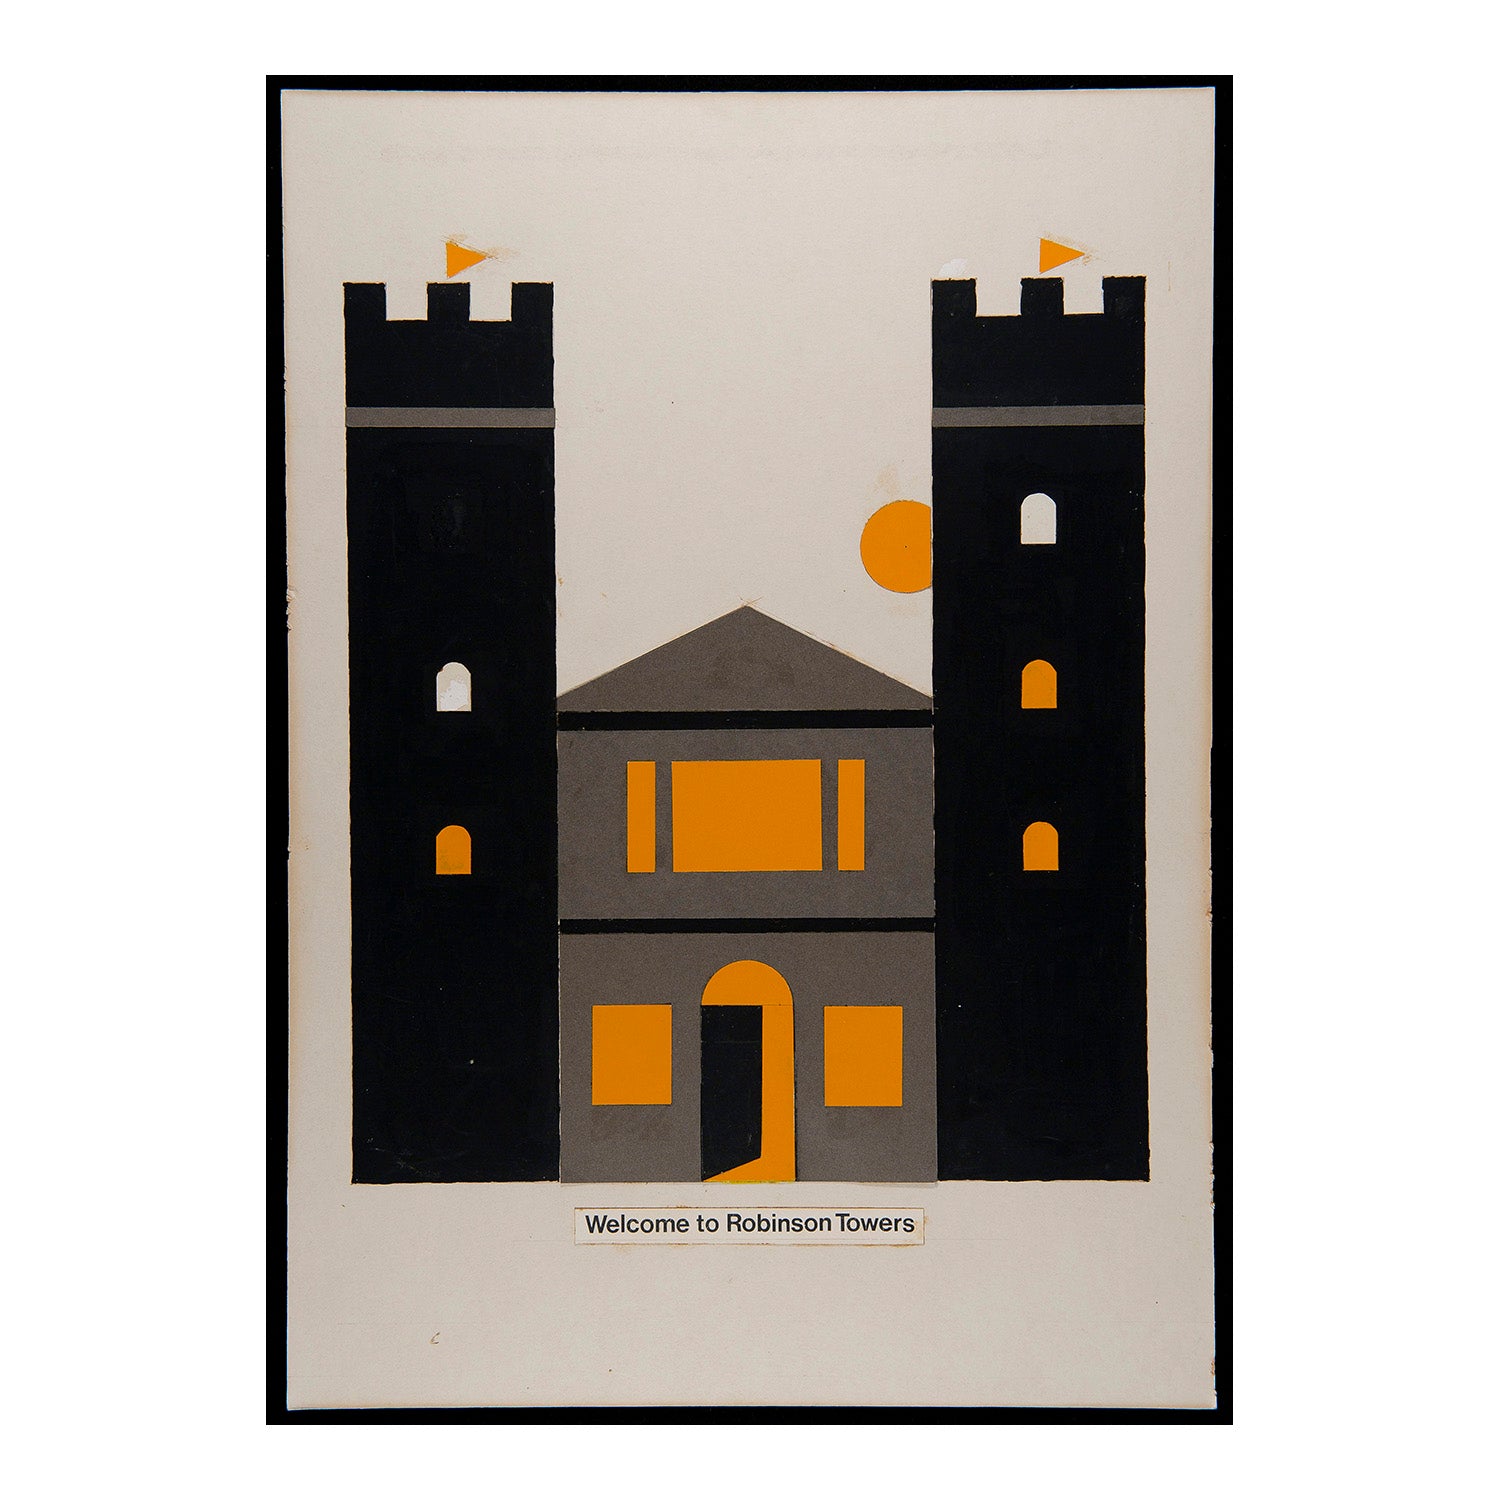 Welcome to Robinson Towers (Tom Eckersley)